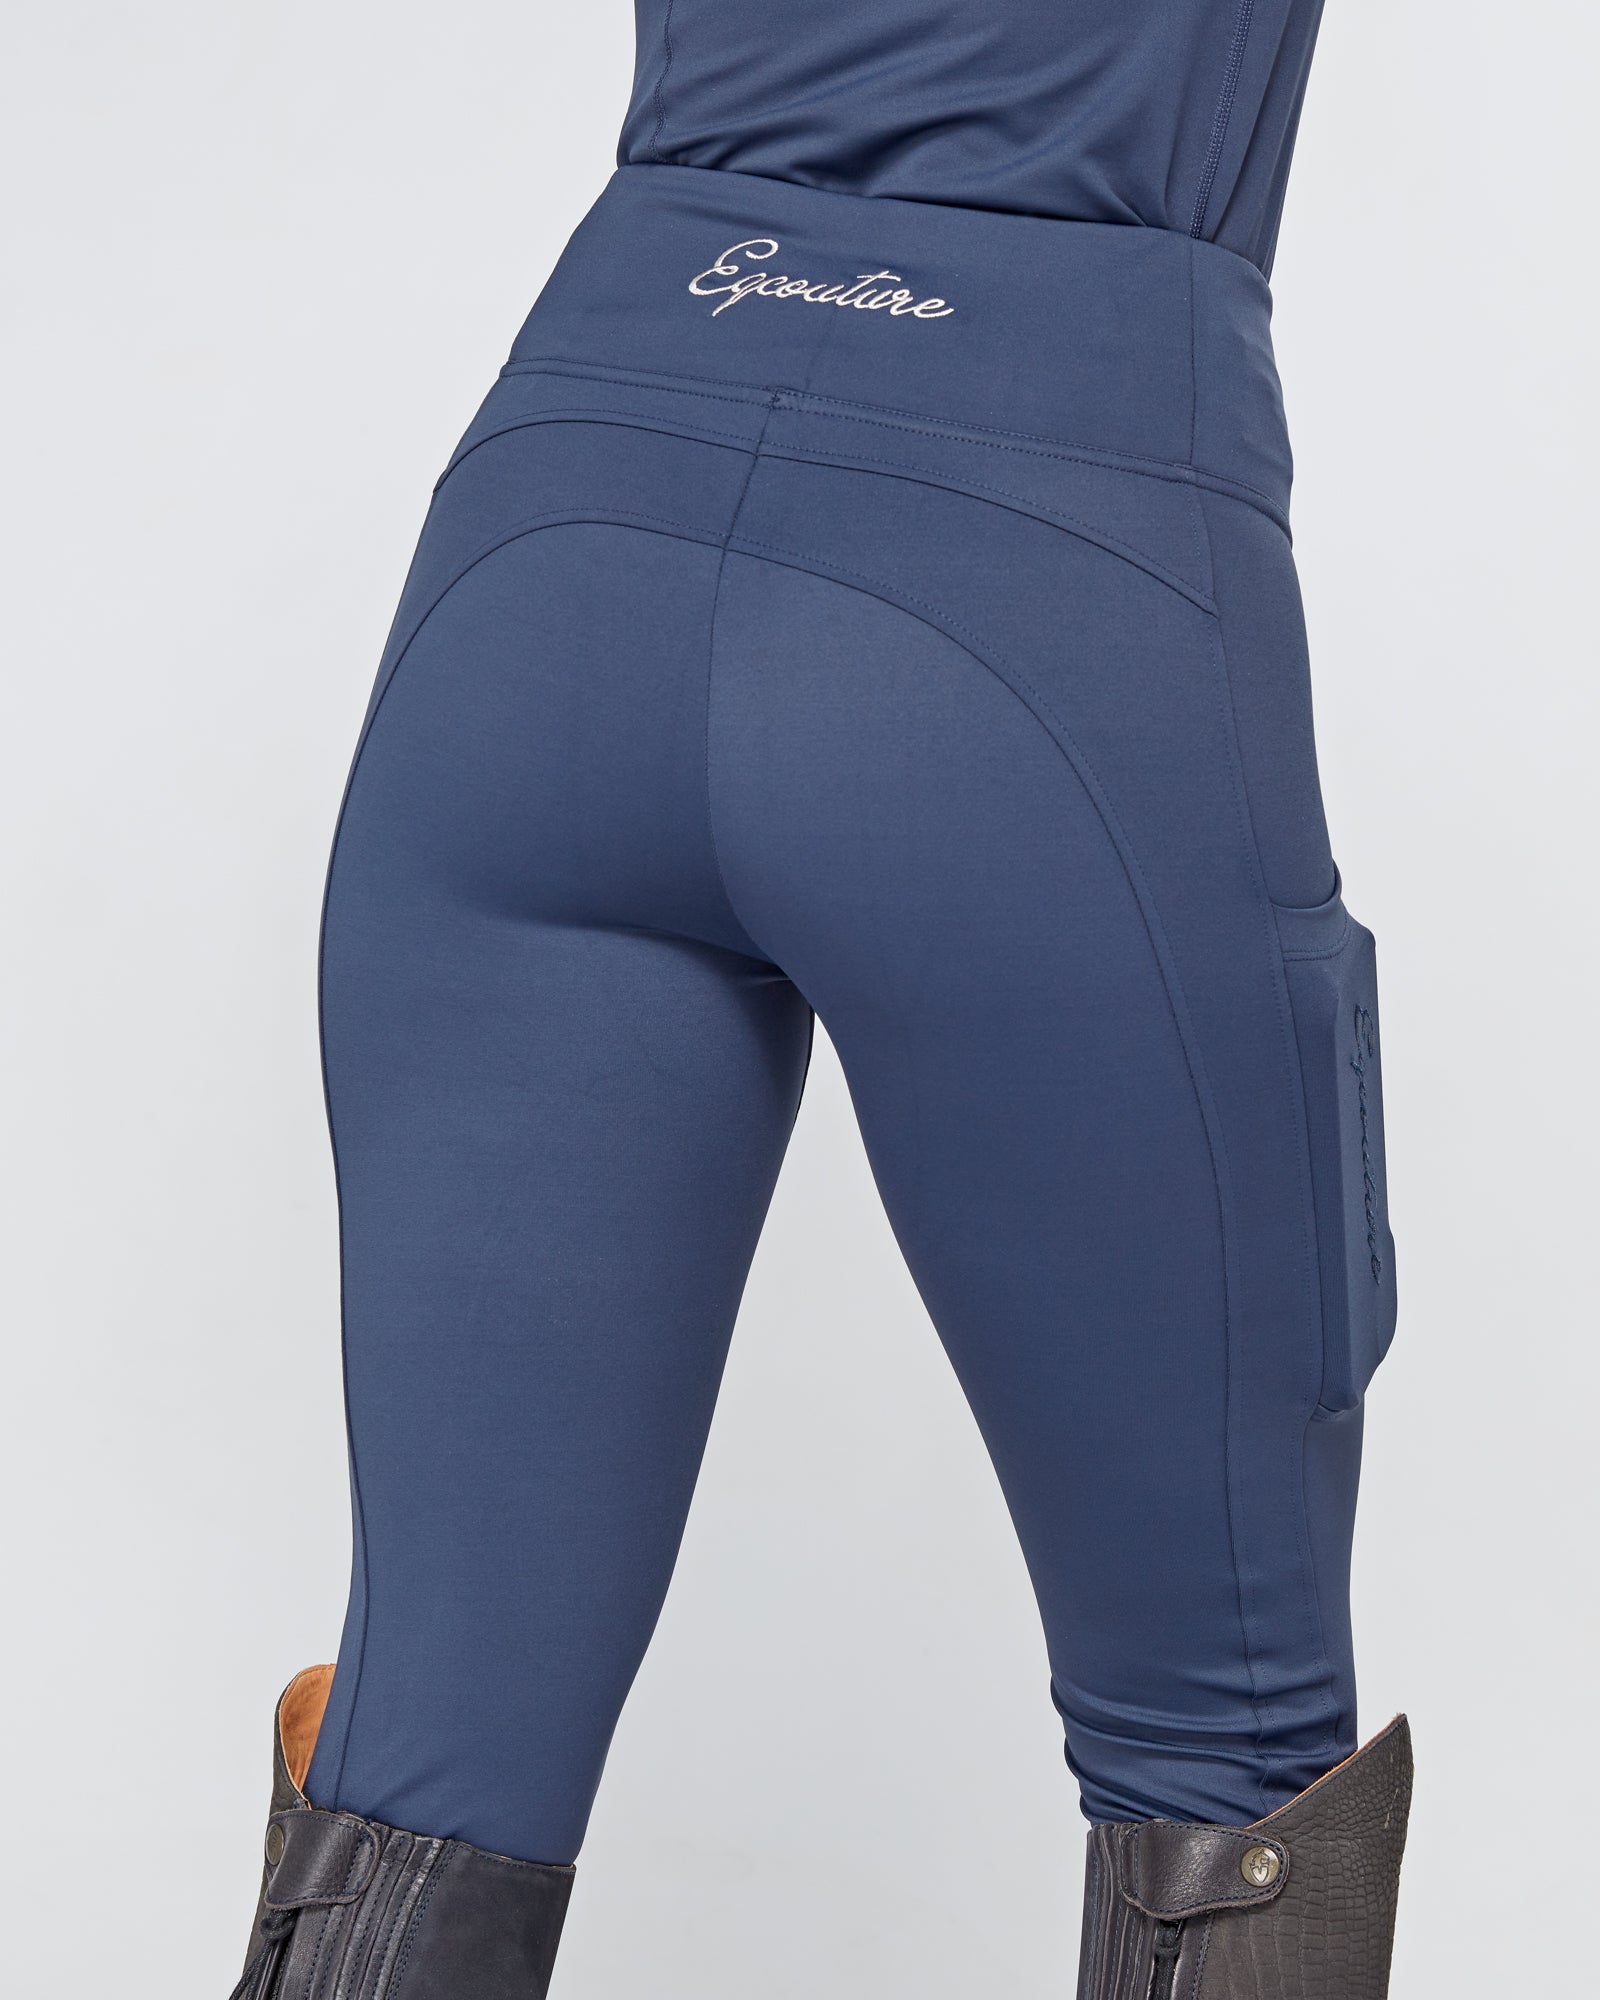 Navy Riding Leggings / Tights with Phone Pockets - NO GRIP/ SILICONE